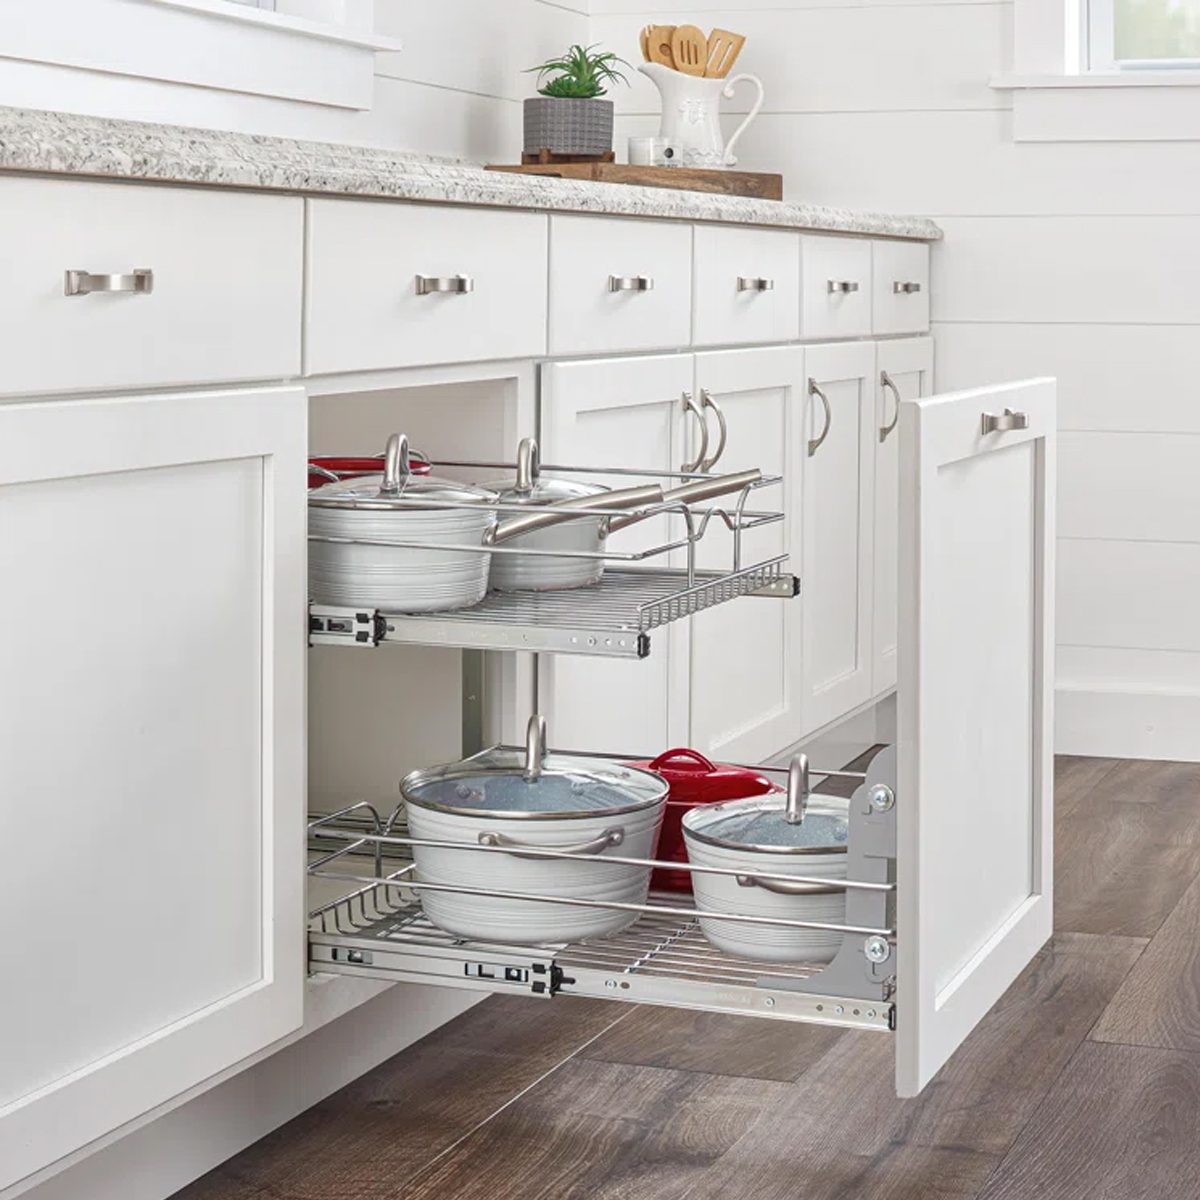 Built-In Storage Cabinet Solutions To Make The Most Of Your Space – Forbes  Home